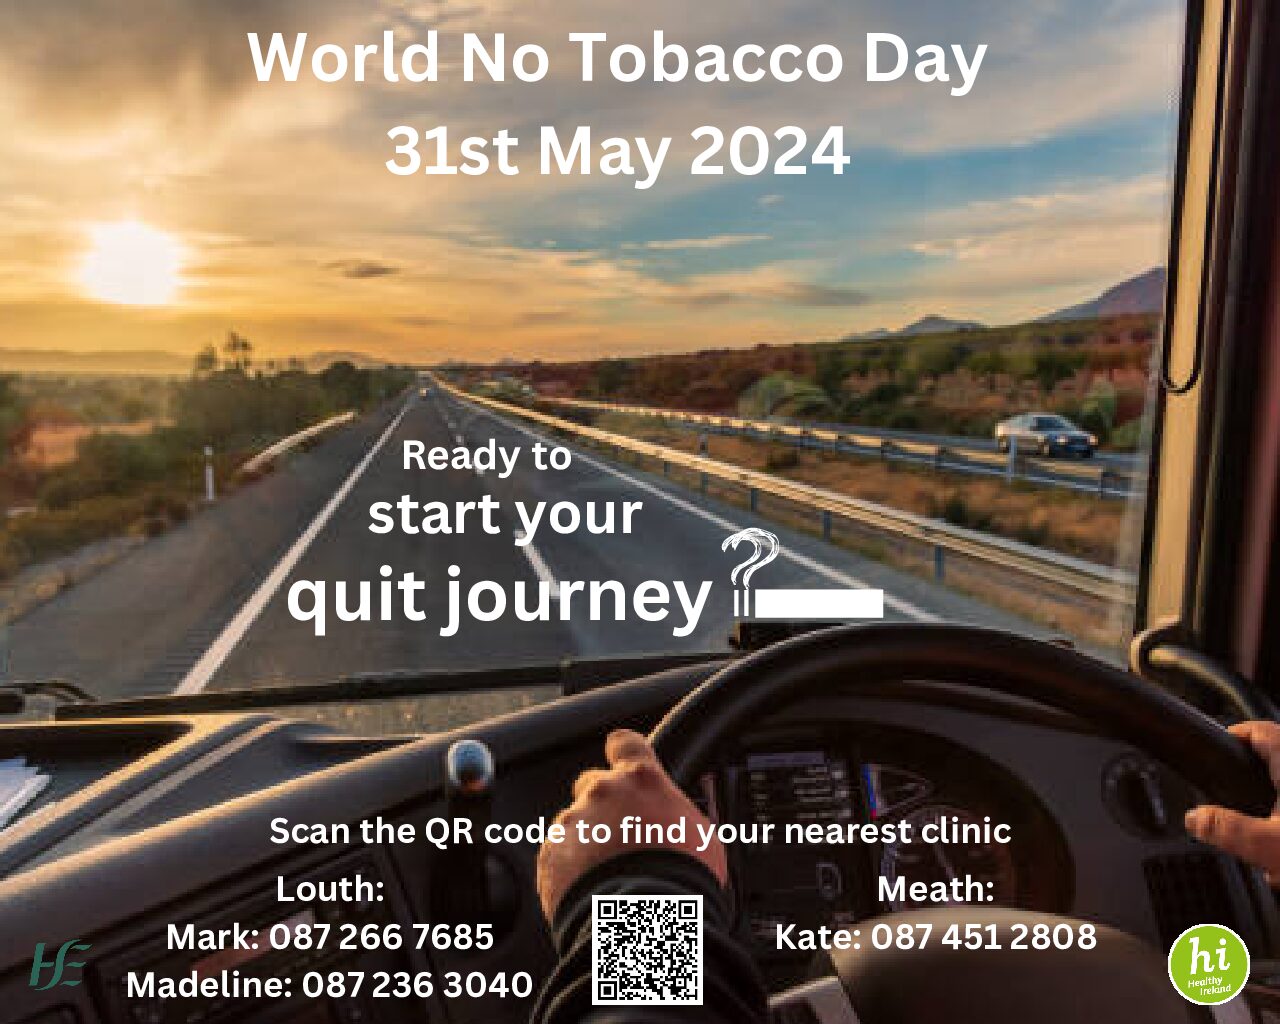 World No Tobacco Day takes place on 31st May